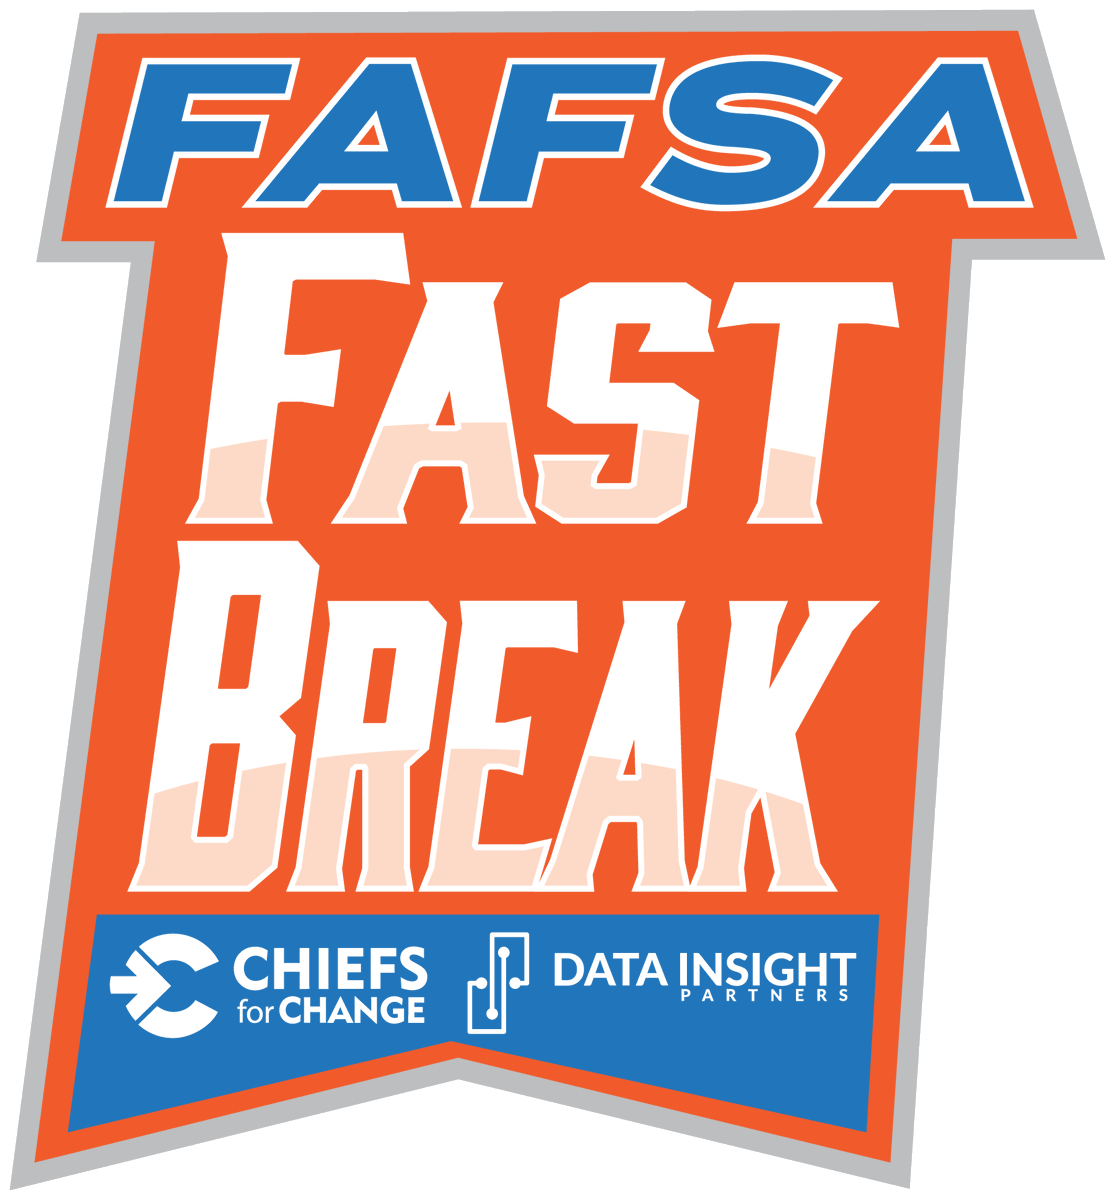 Seniors: Did you know that billions of $$ in federal college aid are left on the table each year when students fail to complete the FAFSA? That’s why we're running a #FAFSAFastBreak to get more GCS students to fill out the form. Check it out! chiefsforchange.org/fafsa/